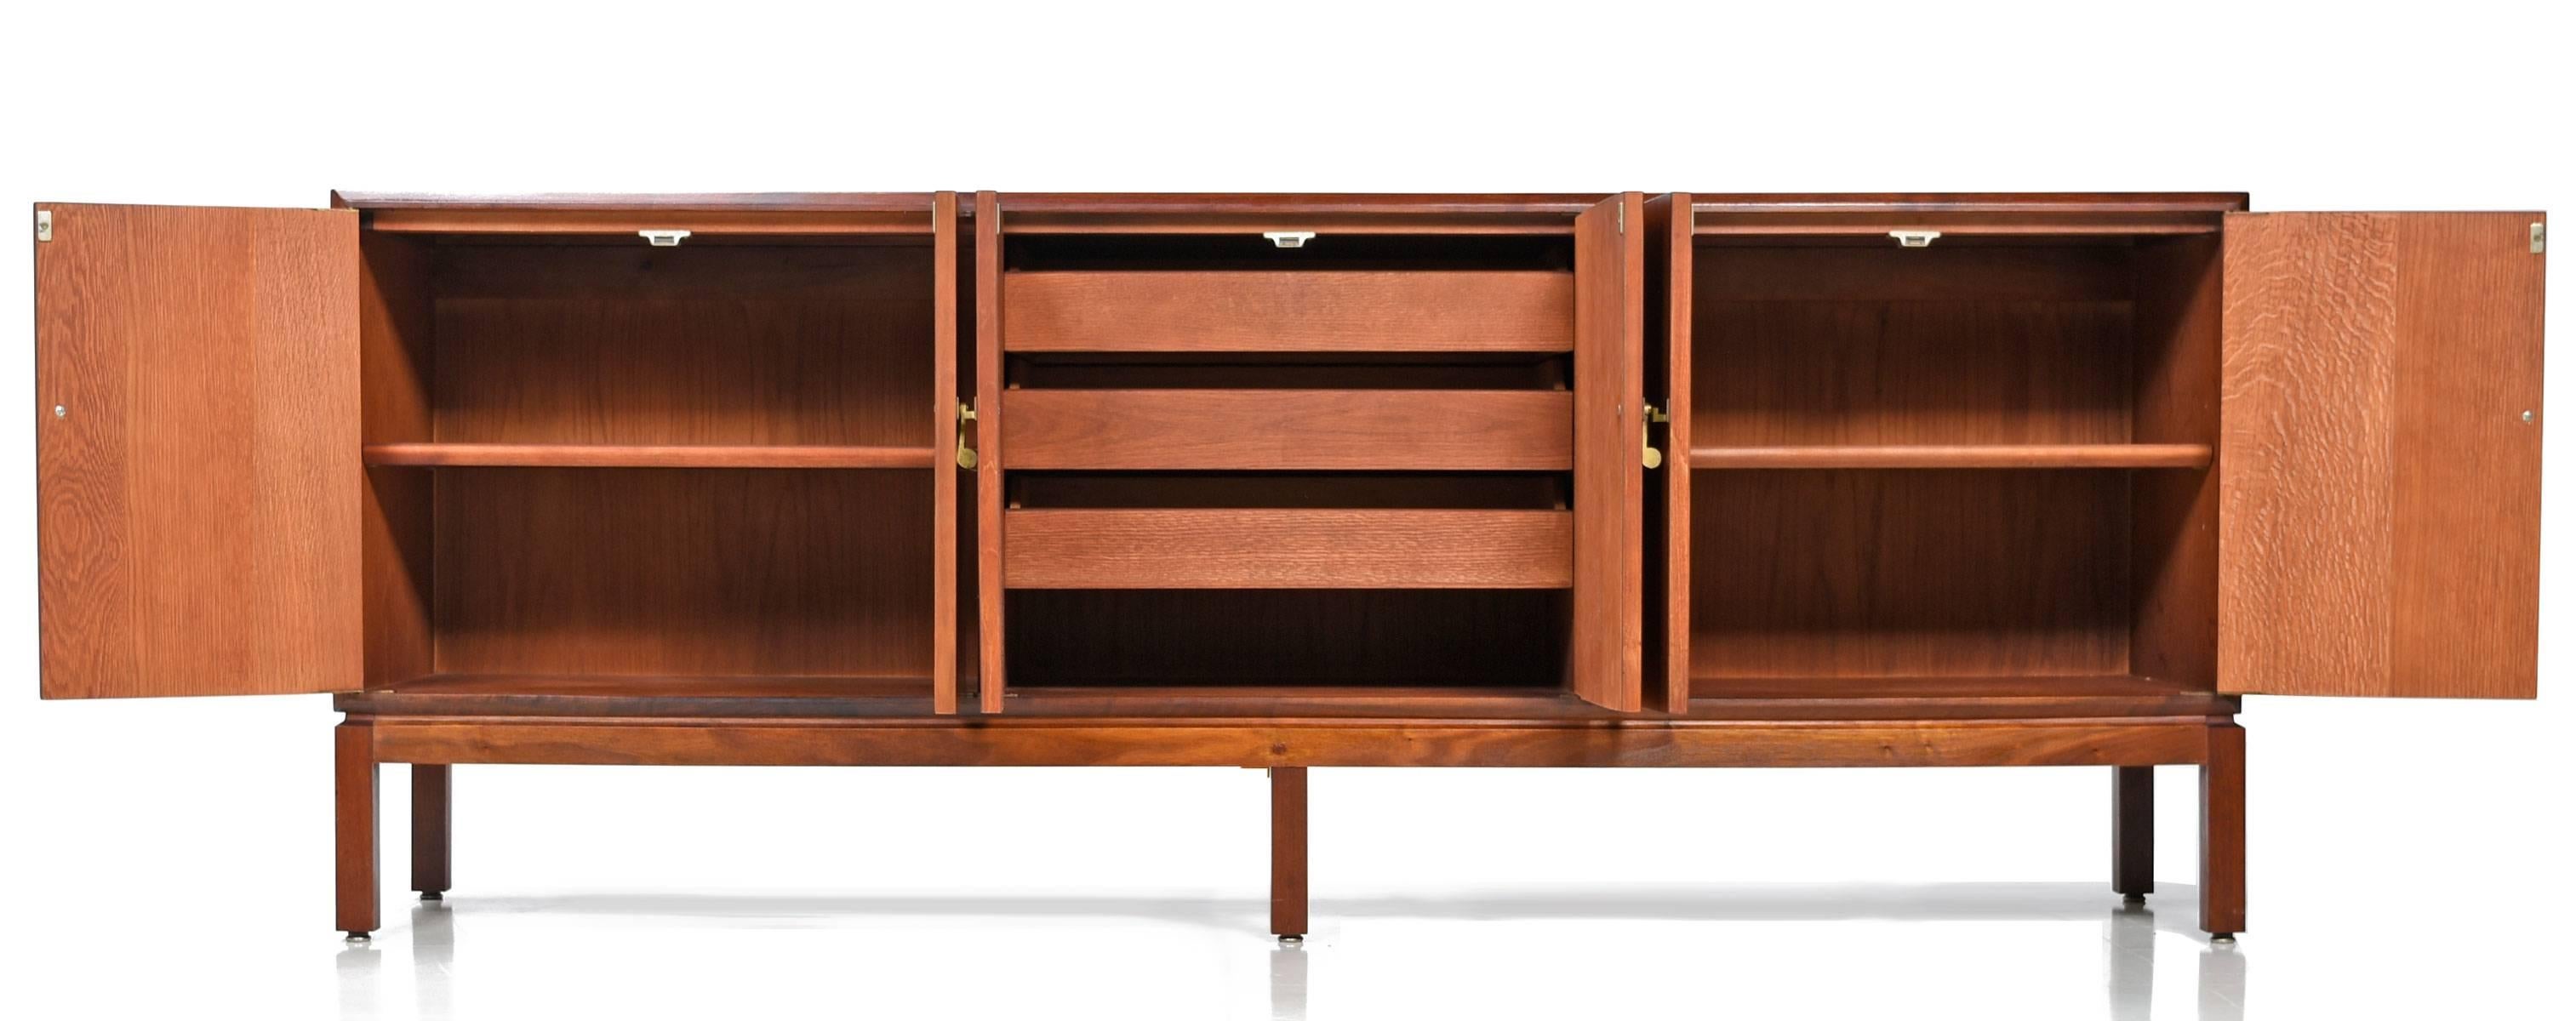 Mid-20th Century Foster-McDavid Style Walnut Credenza with Brass Latches, 1960s